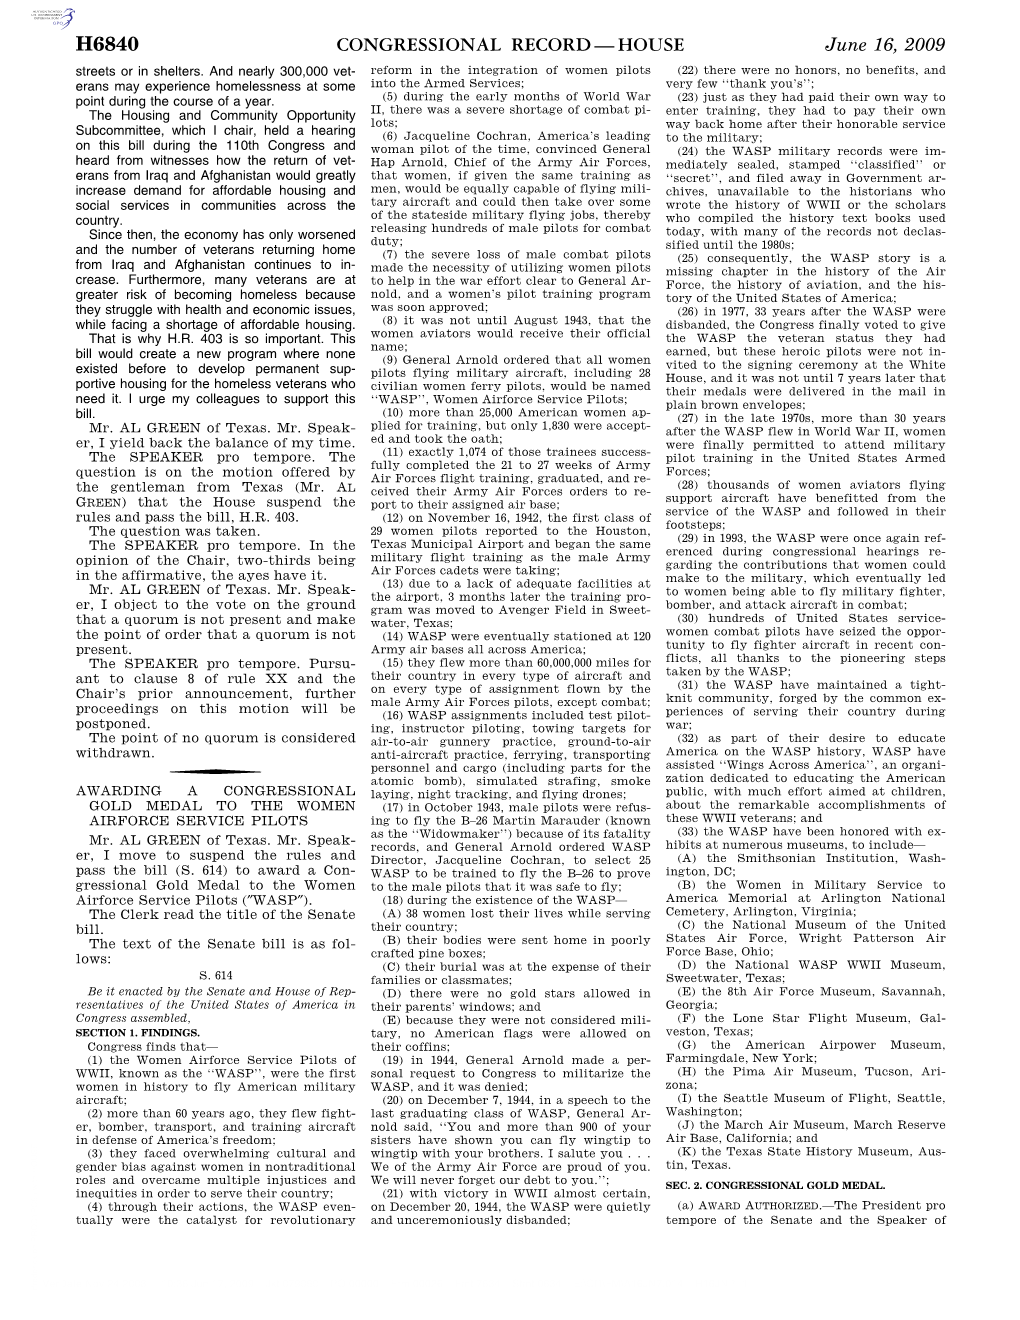 Congressional Record—House H6840